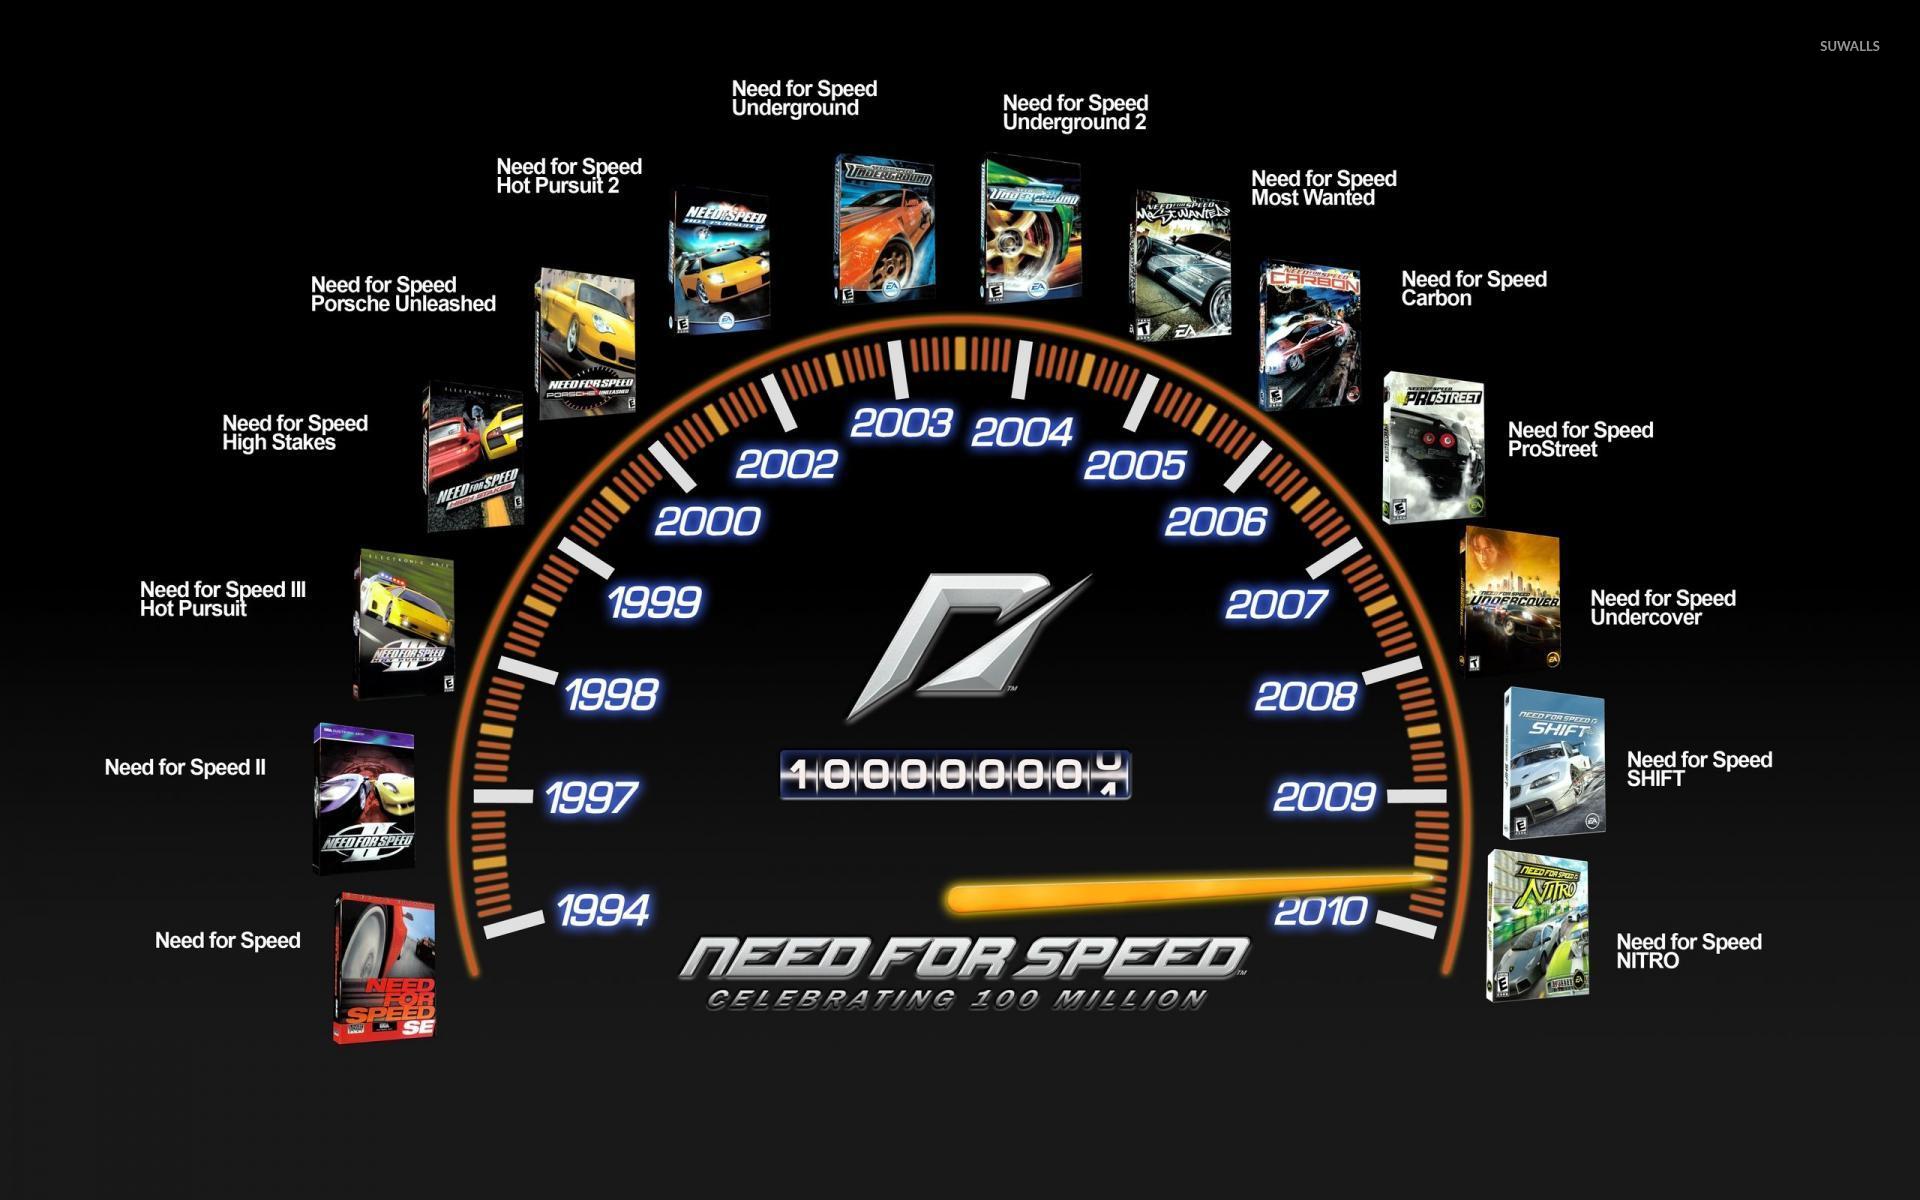 Evolution of Need for Speed wallpaper - Game wallpapers 